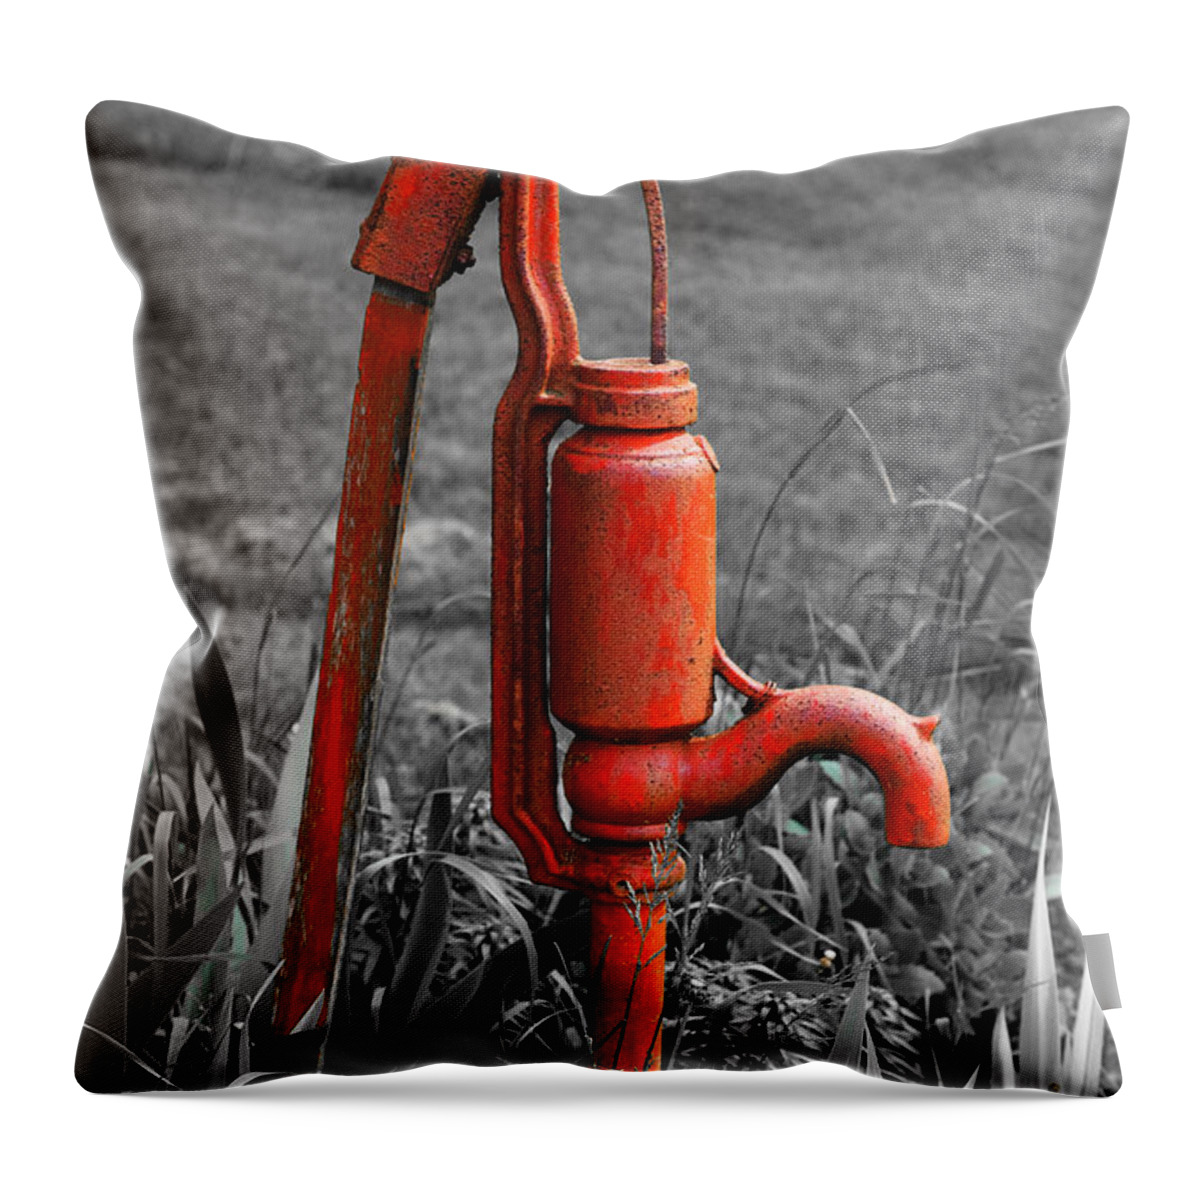 Hand Pump Throw Pillow featuring the photograph The Hand Pump by Barbara McMahon